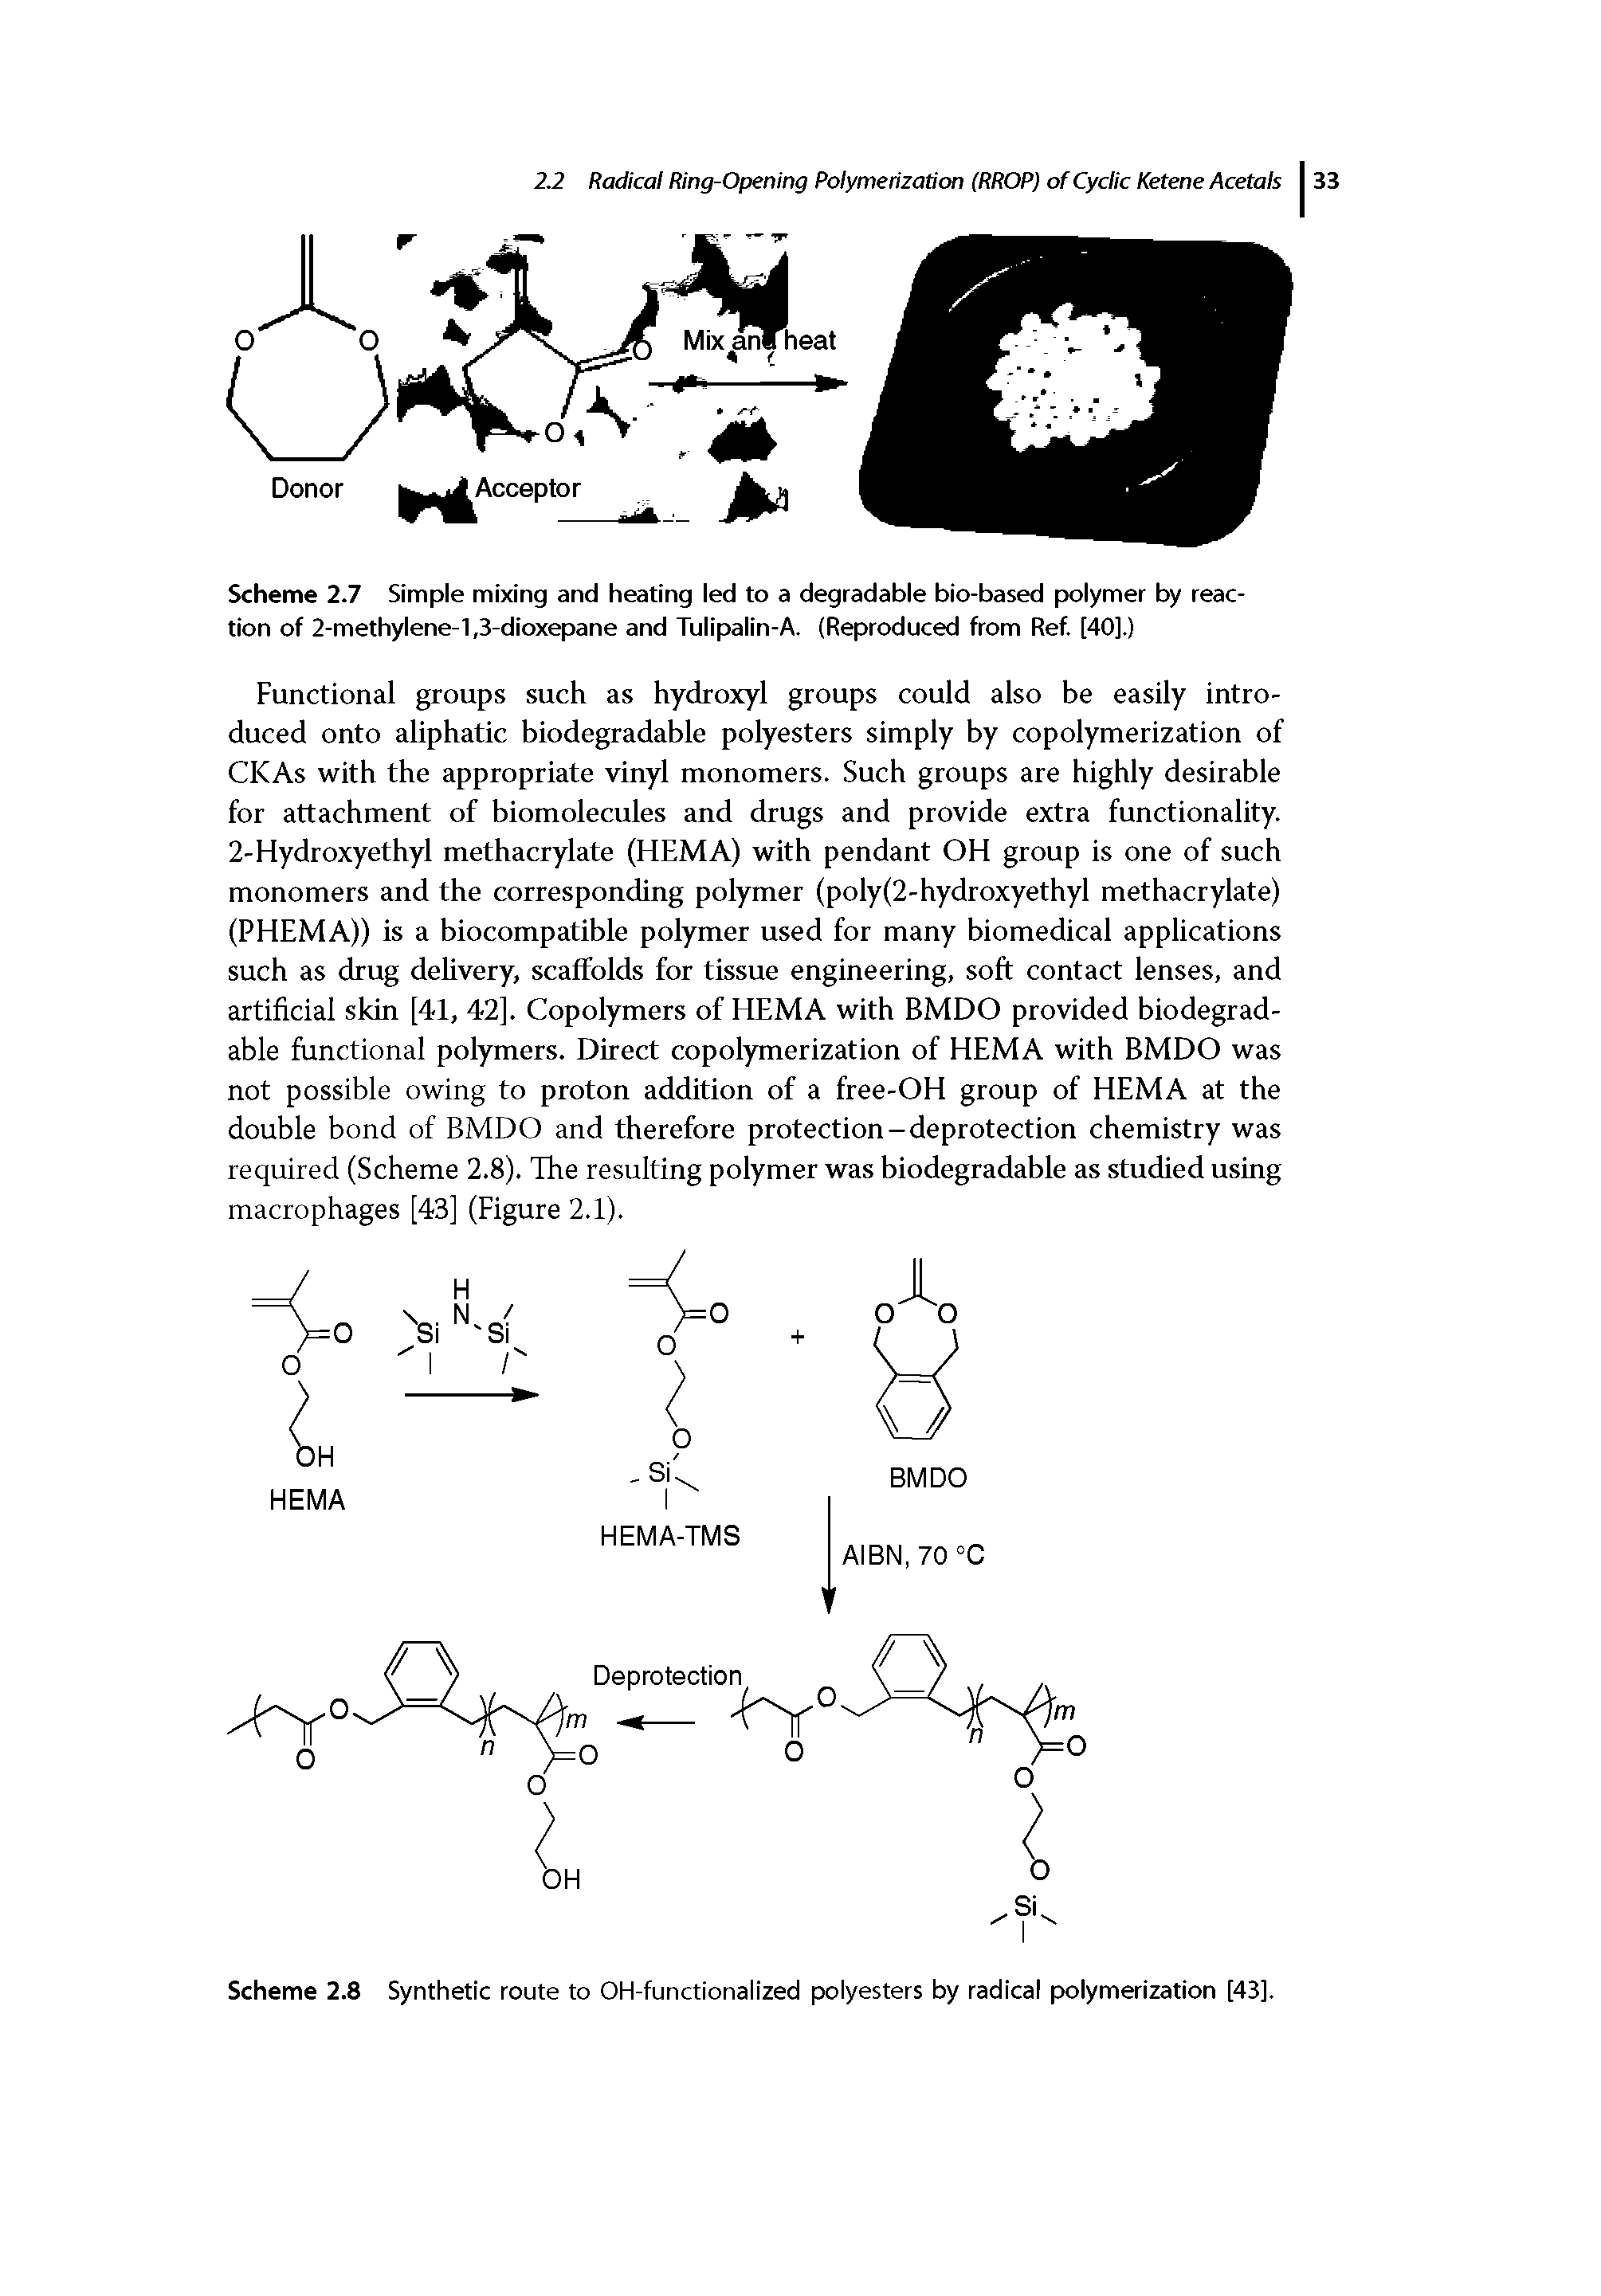 Scheme 2.8 Synthetic route to OH-functionalized polyesters by radical polymerization [43].